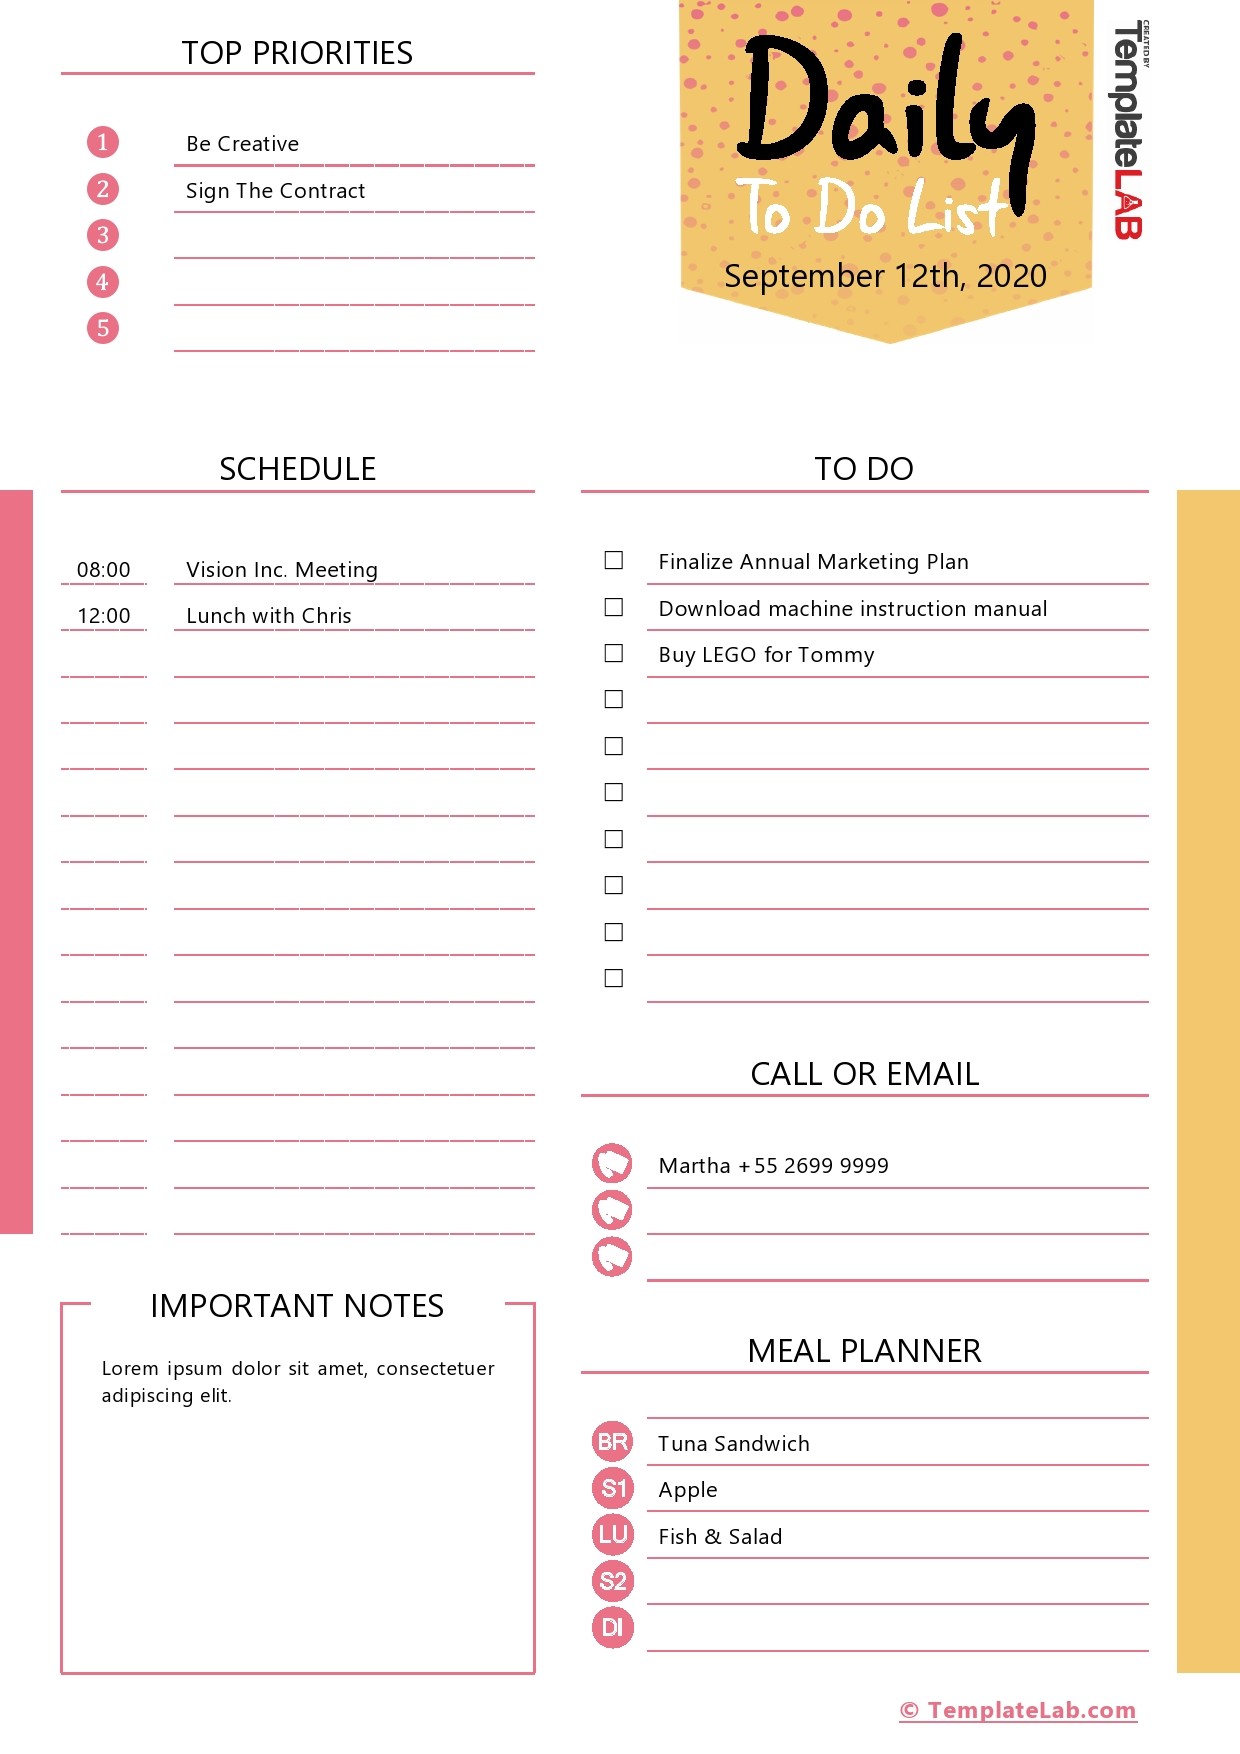 Cool To Do List Template from templatelab.com